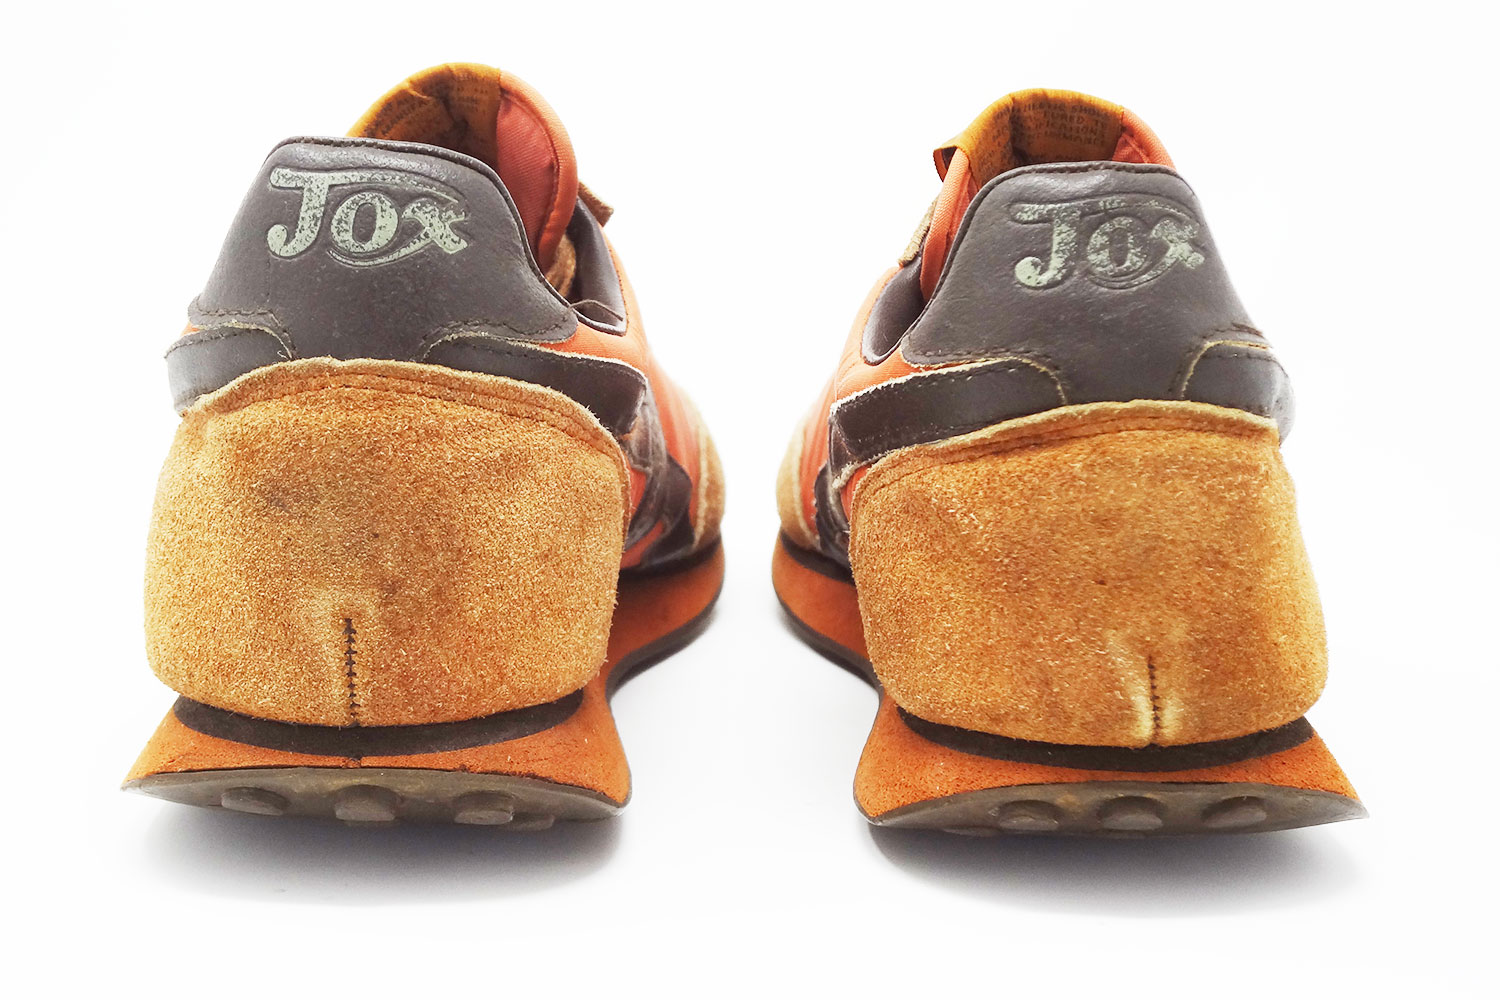 Rare 70s 80s Jox by Thom McAn vintage sneakers rear @ The Deffest